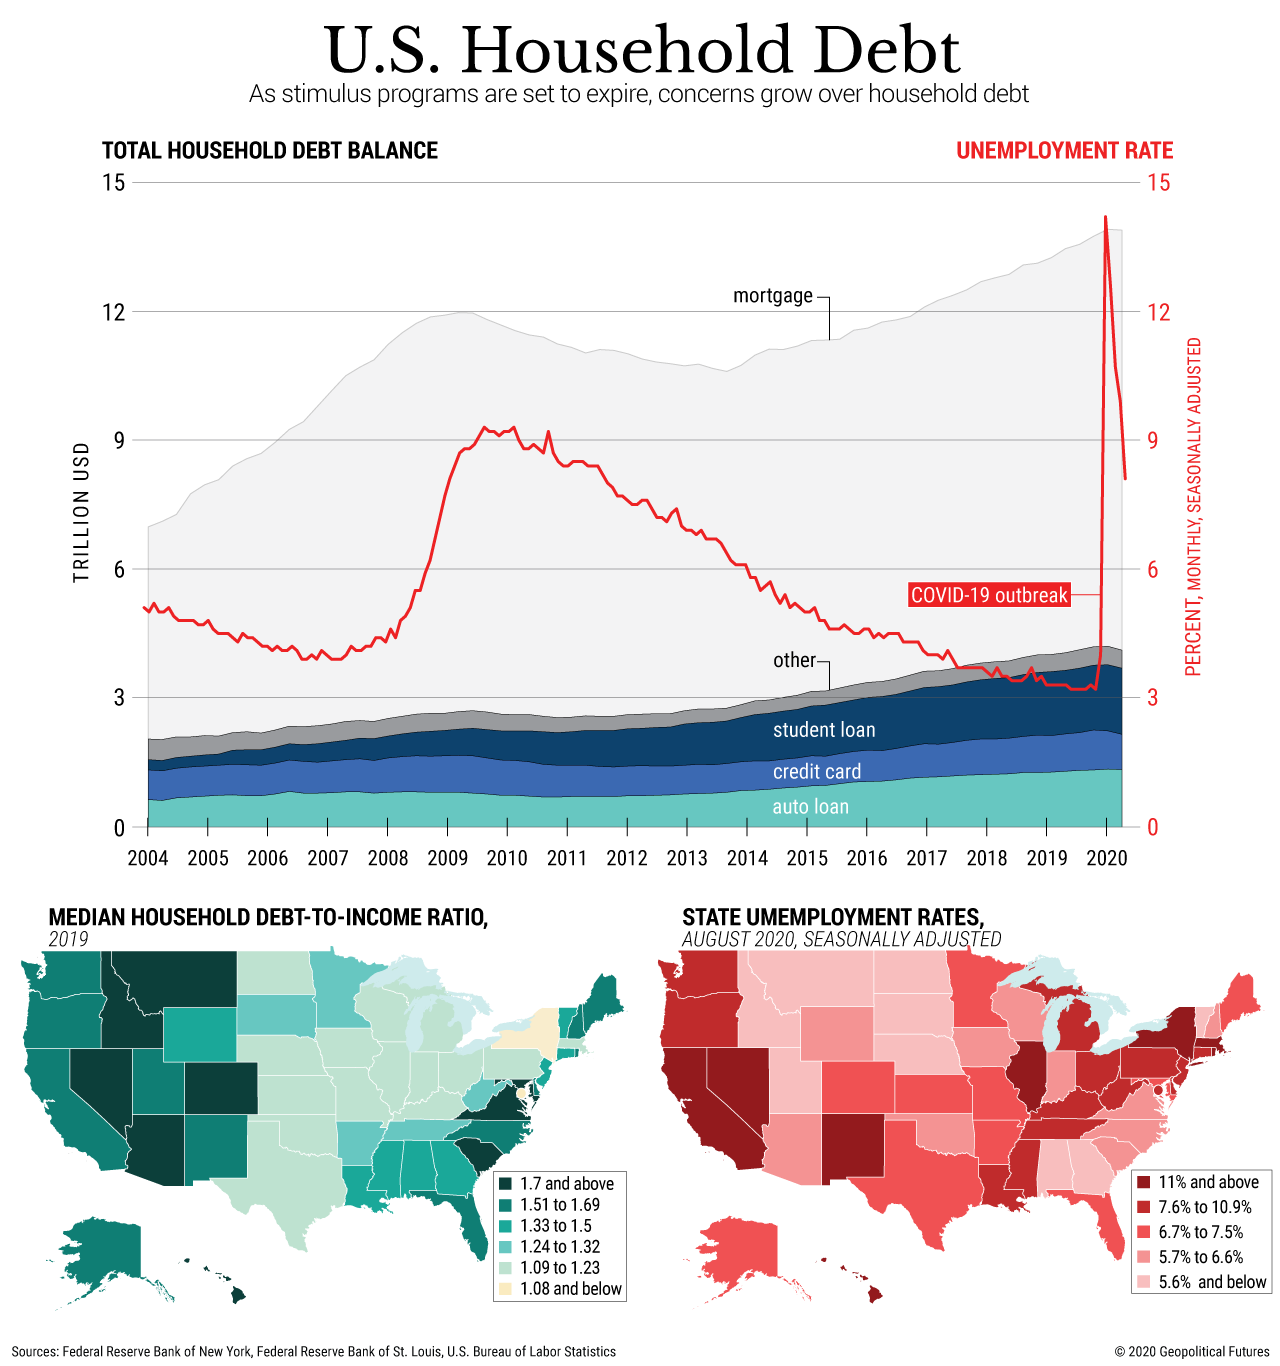 Changes in Consumer Spending and US Household Debt